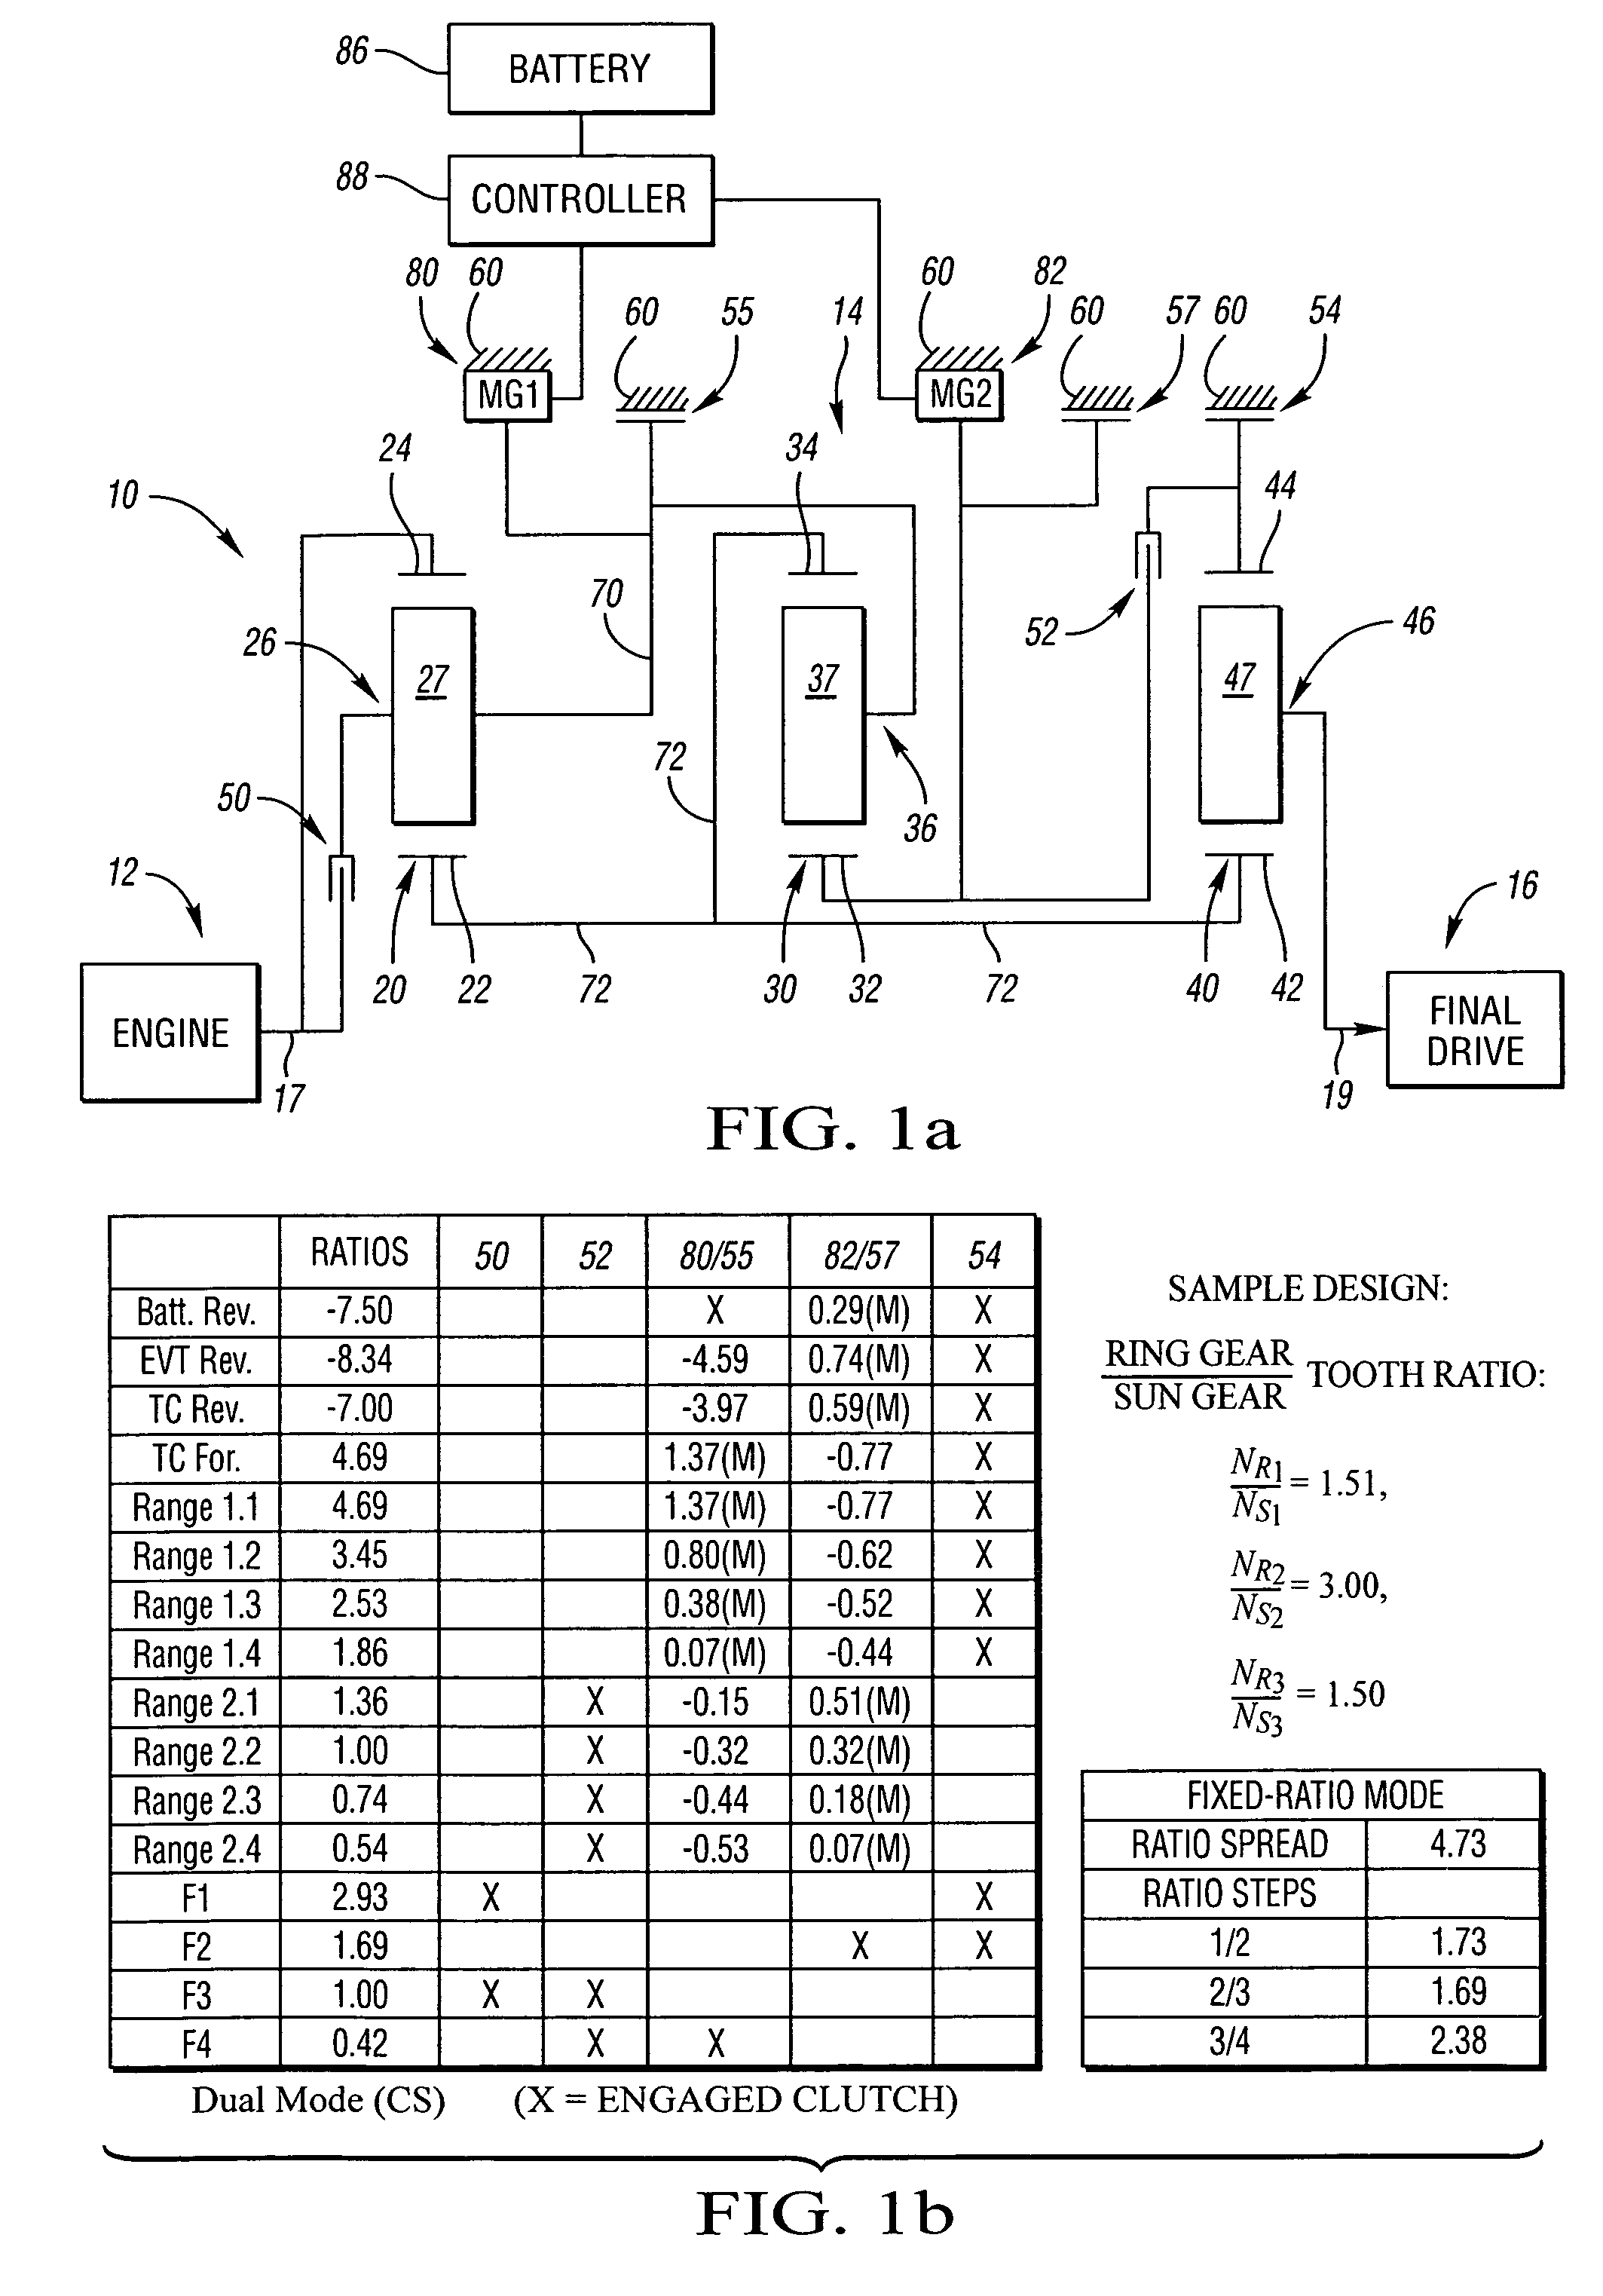 Electrically variable transmission having three interconnected planetary gear sets